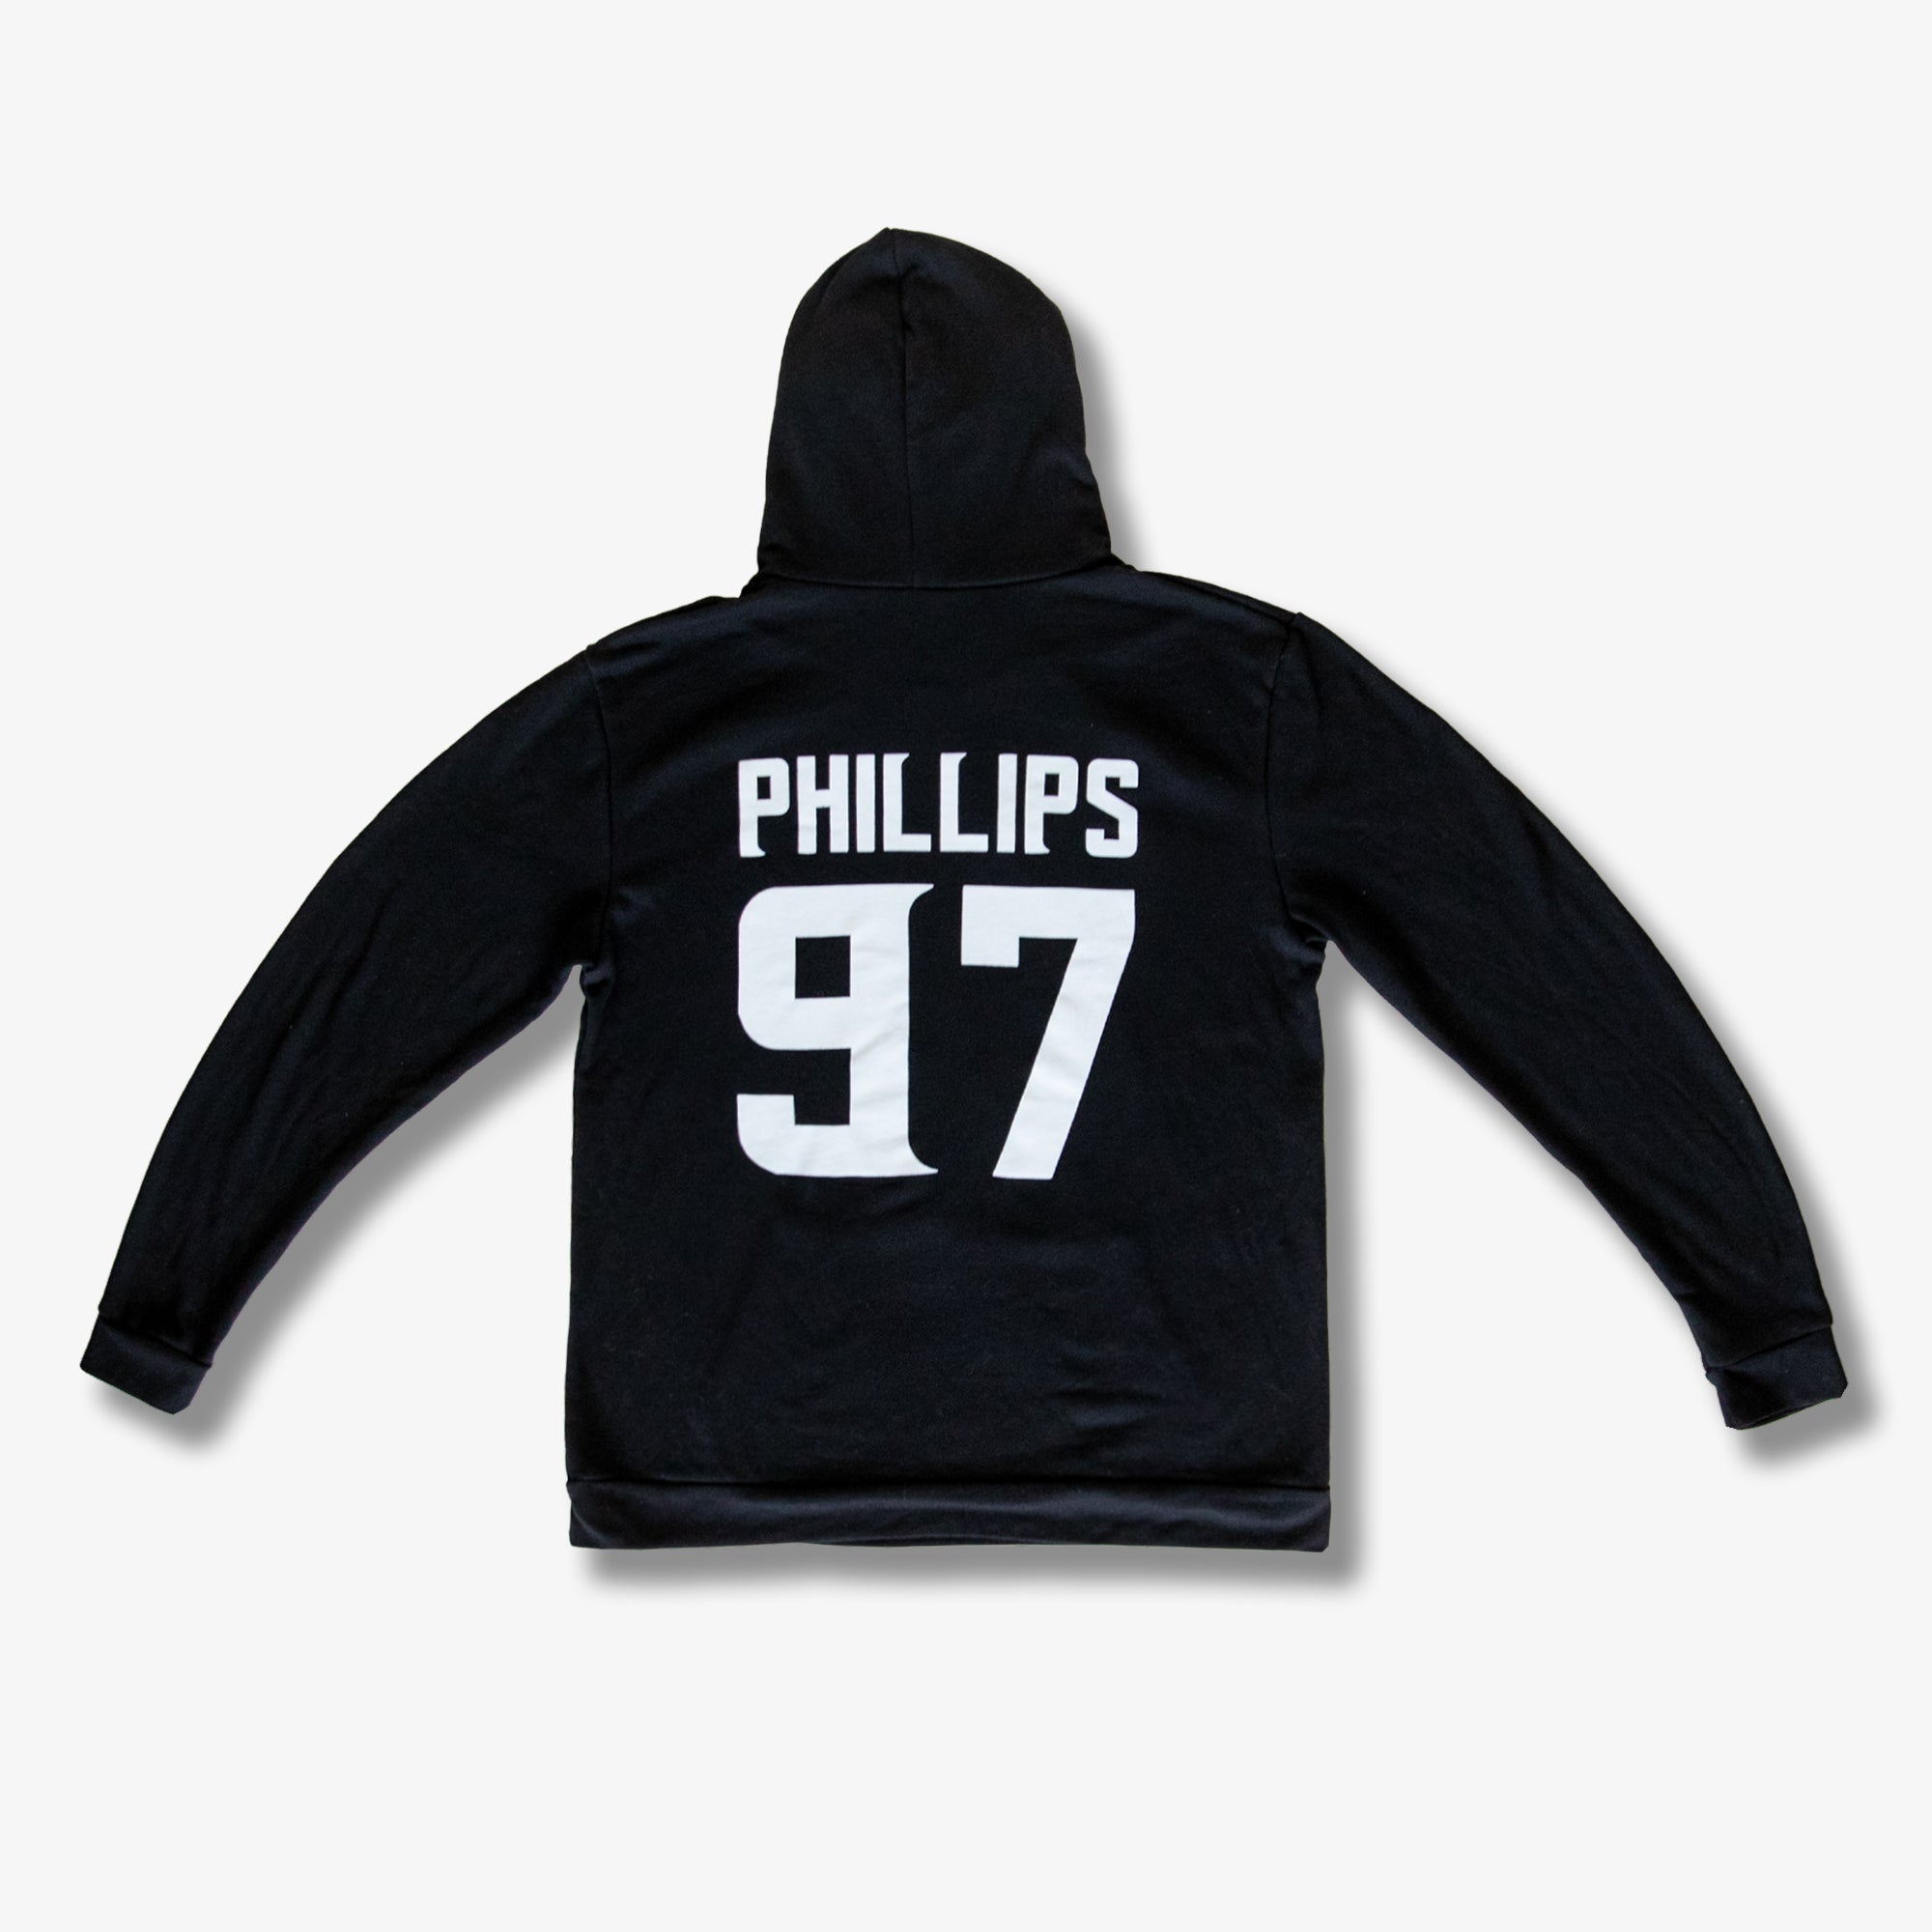 Black hoodie with "Phillips 97" logo screenprinted in large white text